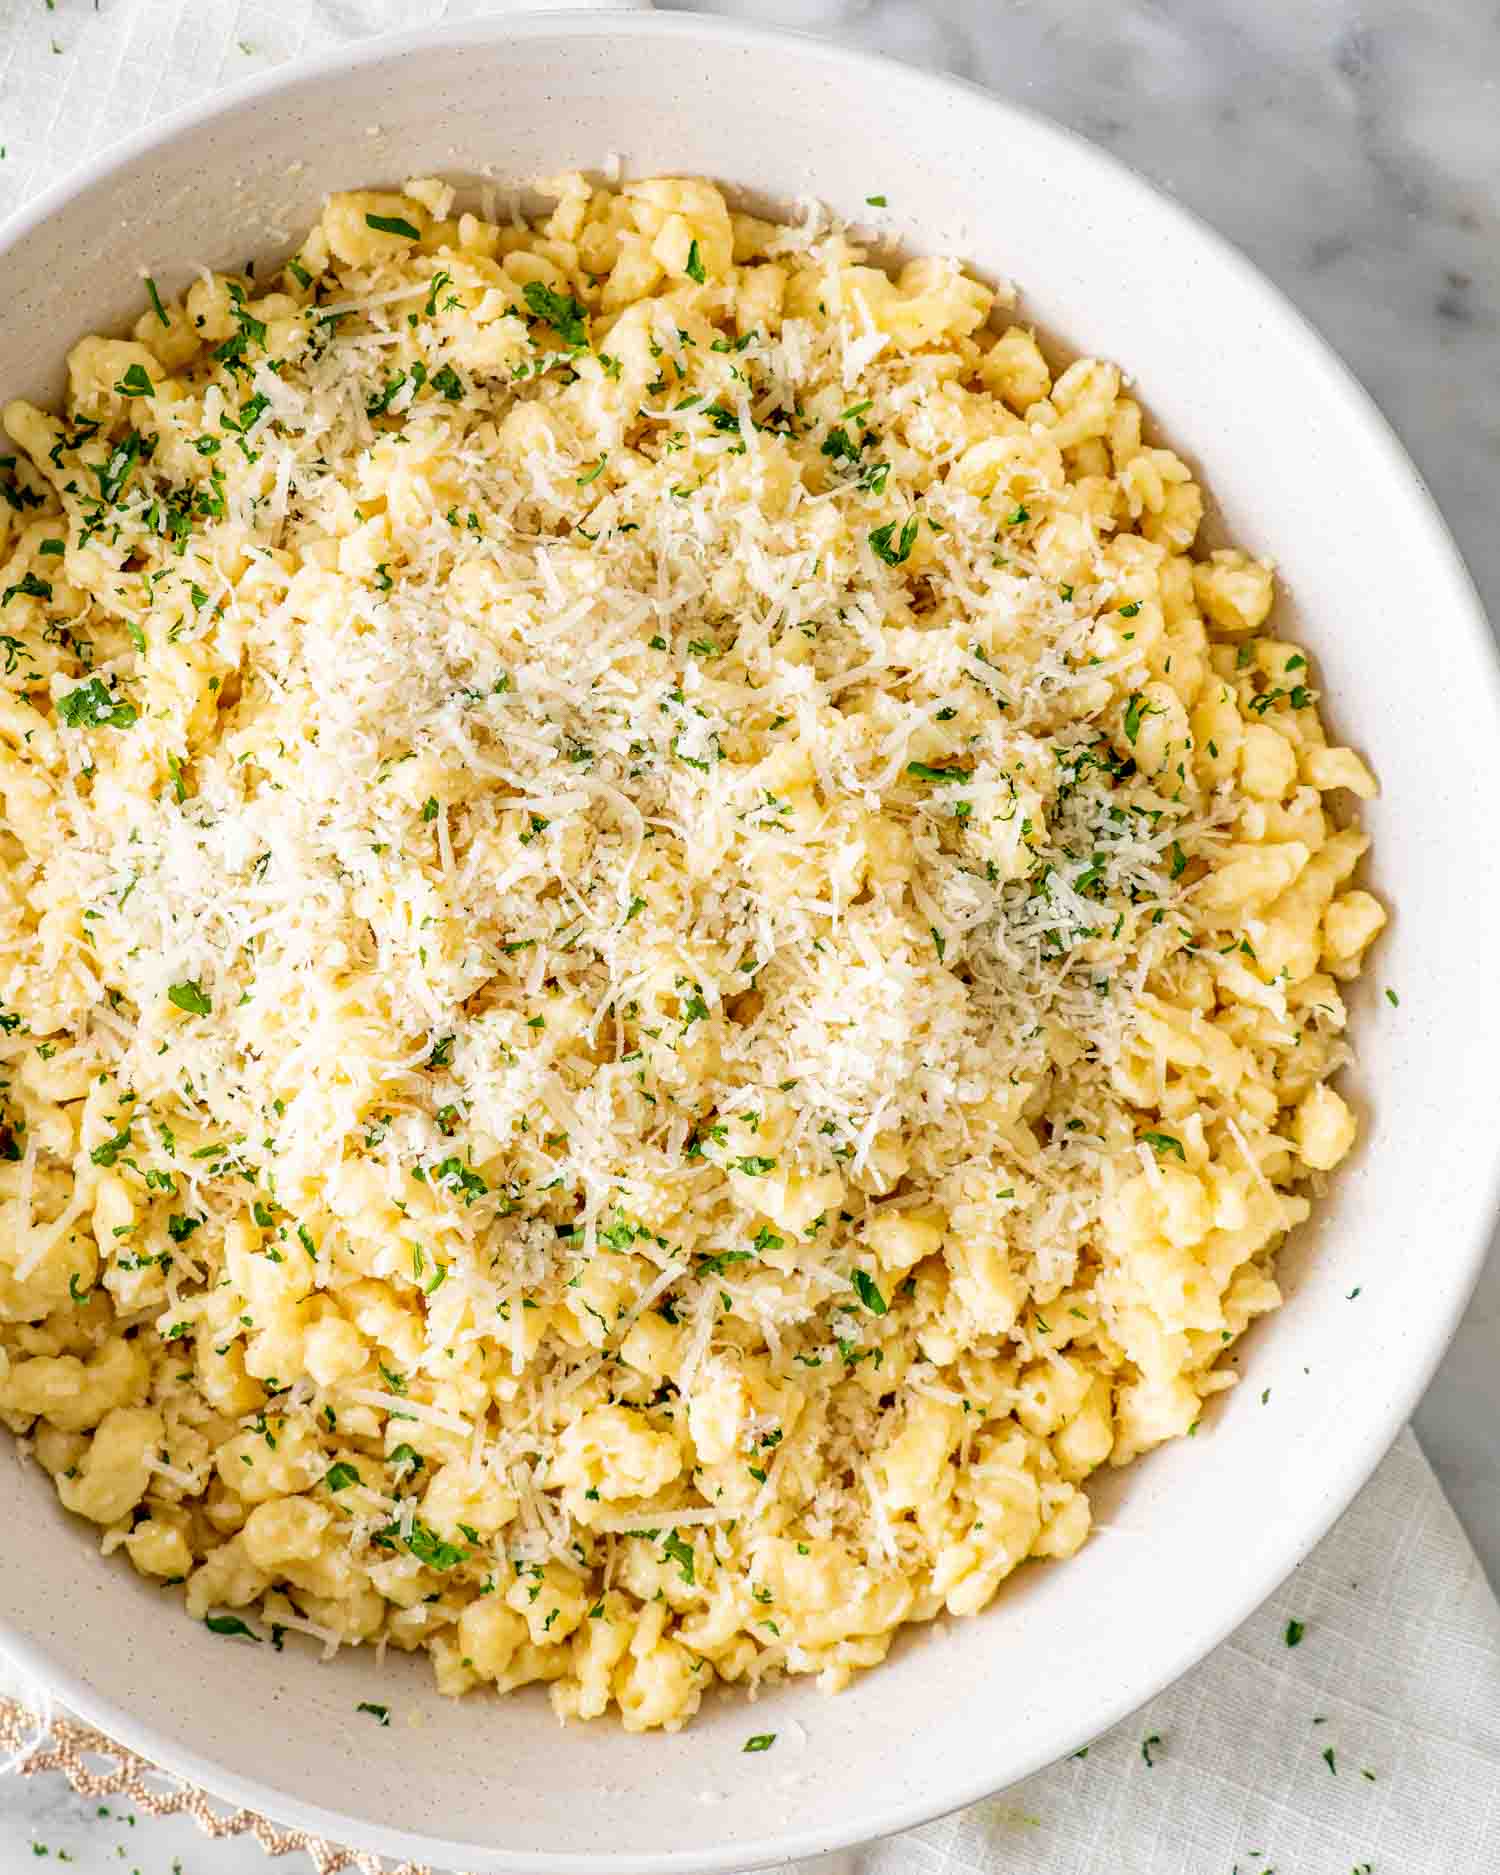 freshly homemade spaetzle with parsley and parmesan cheese in a white bowl.